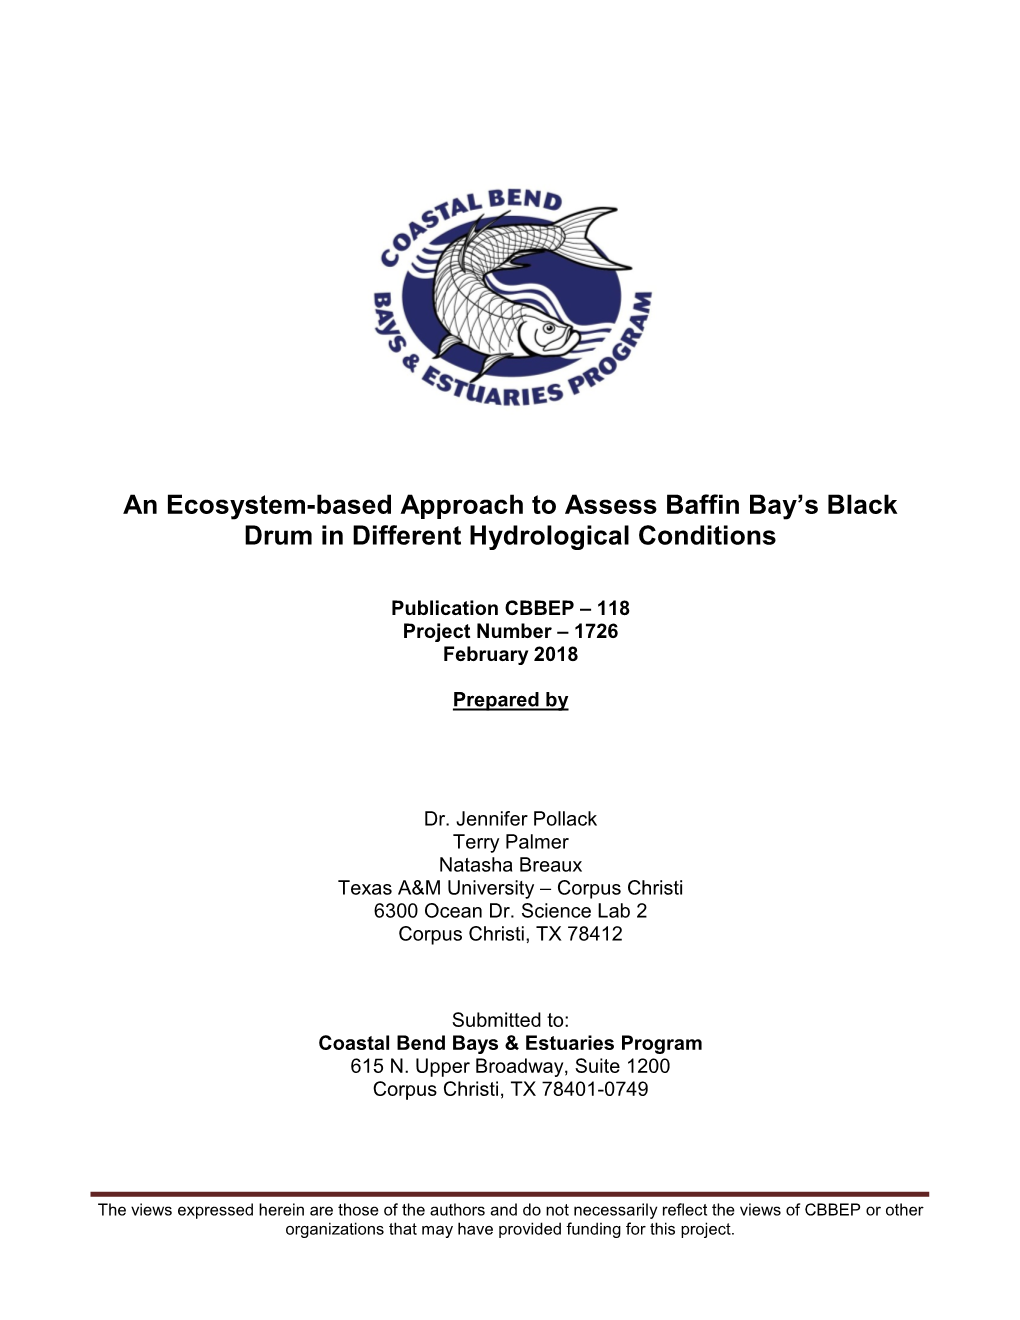 An Ecosystem-Based Approach to Assess Baffin Bay's Black Drum in Different Hydrological Conditions